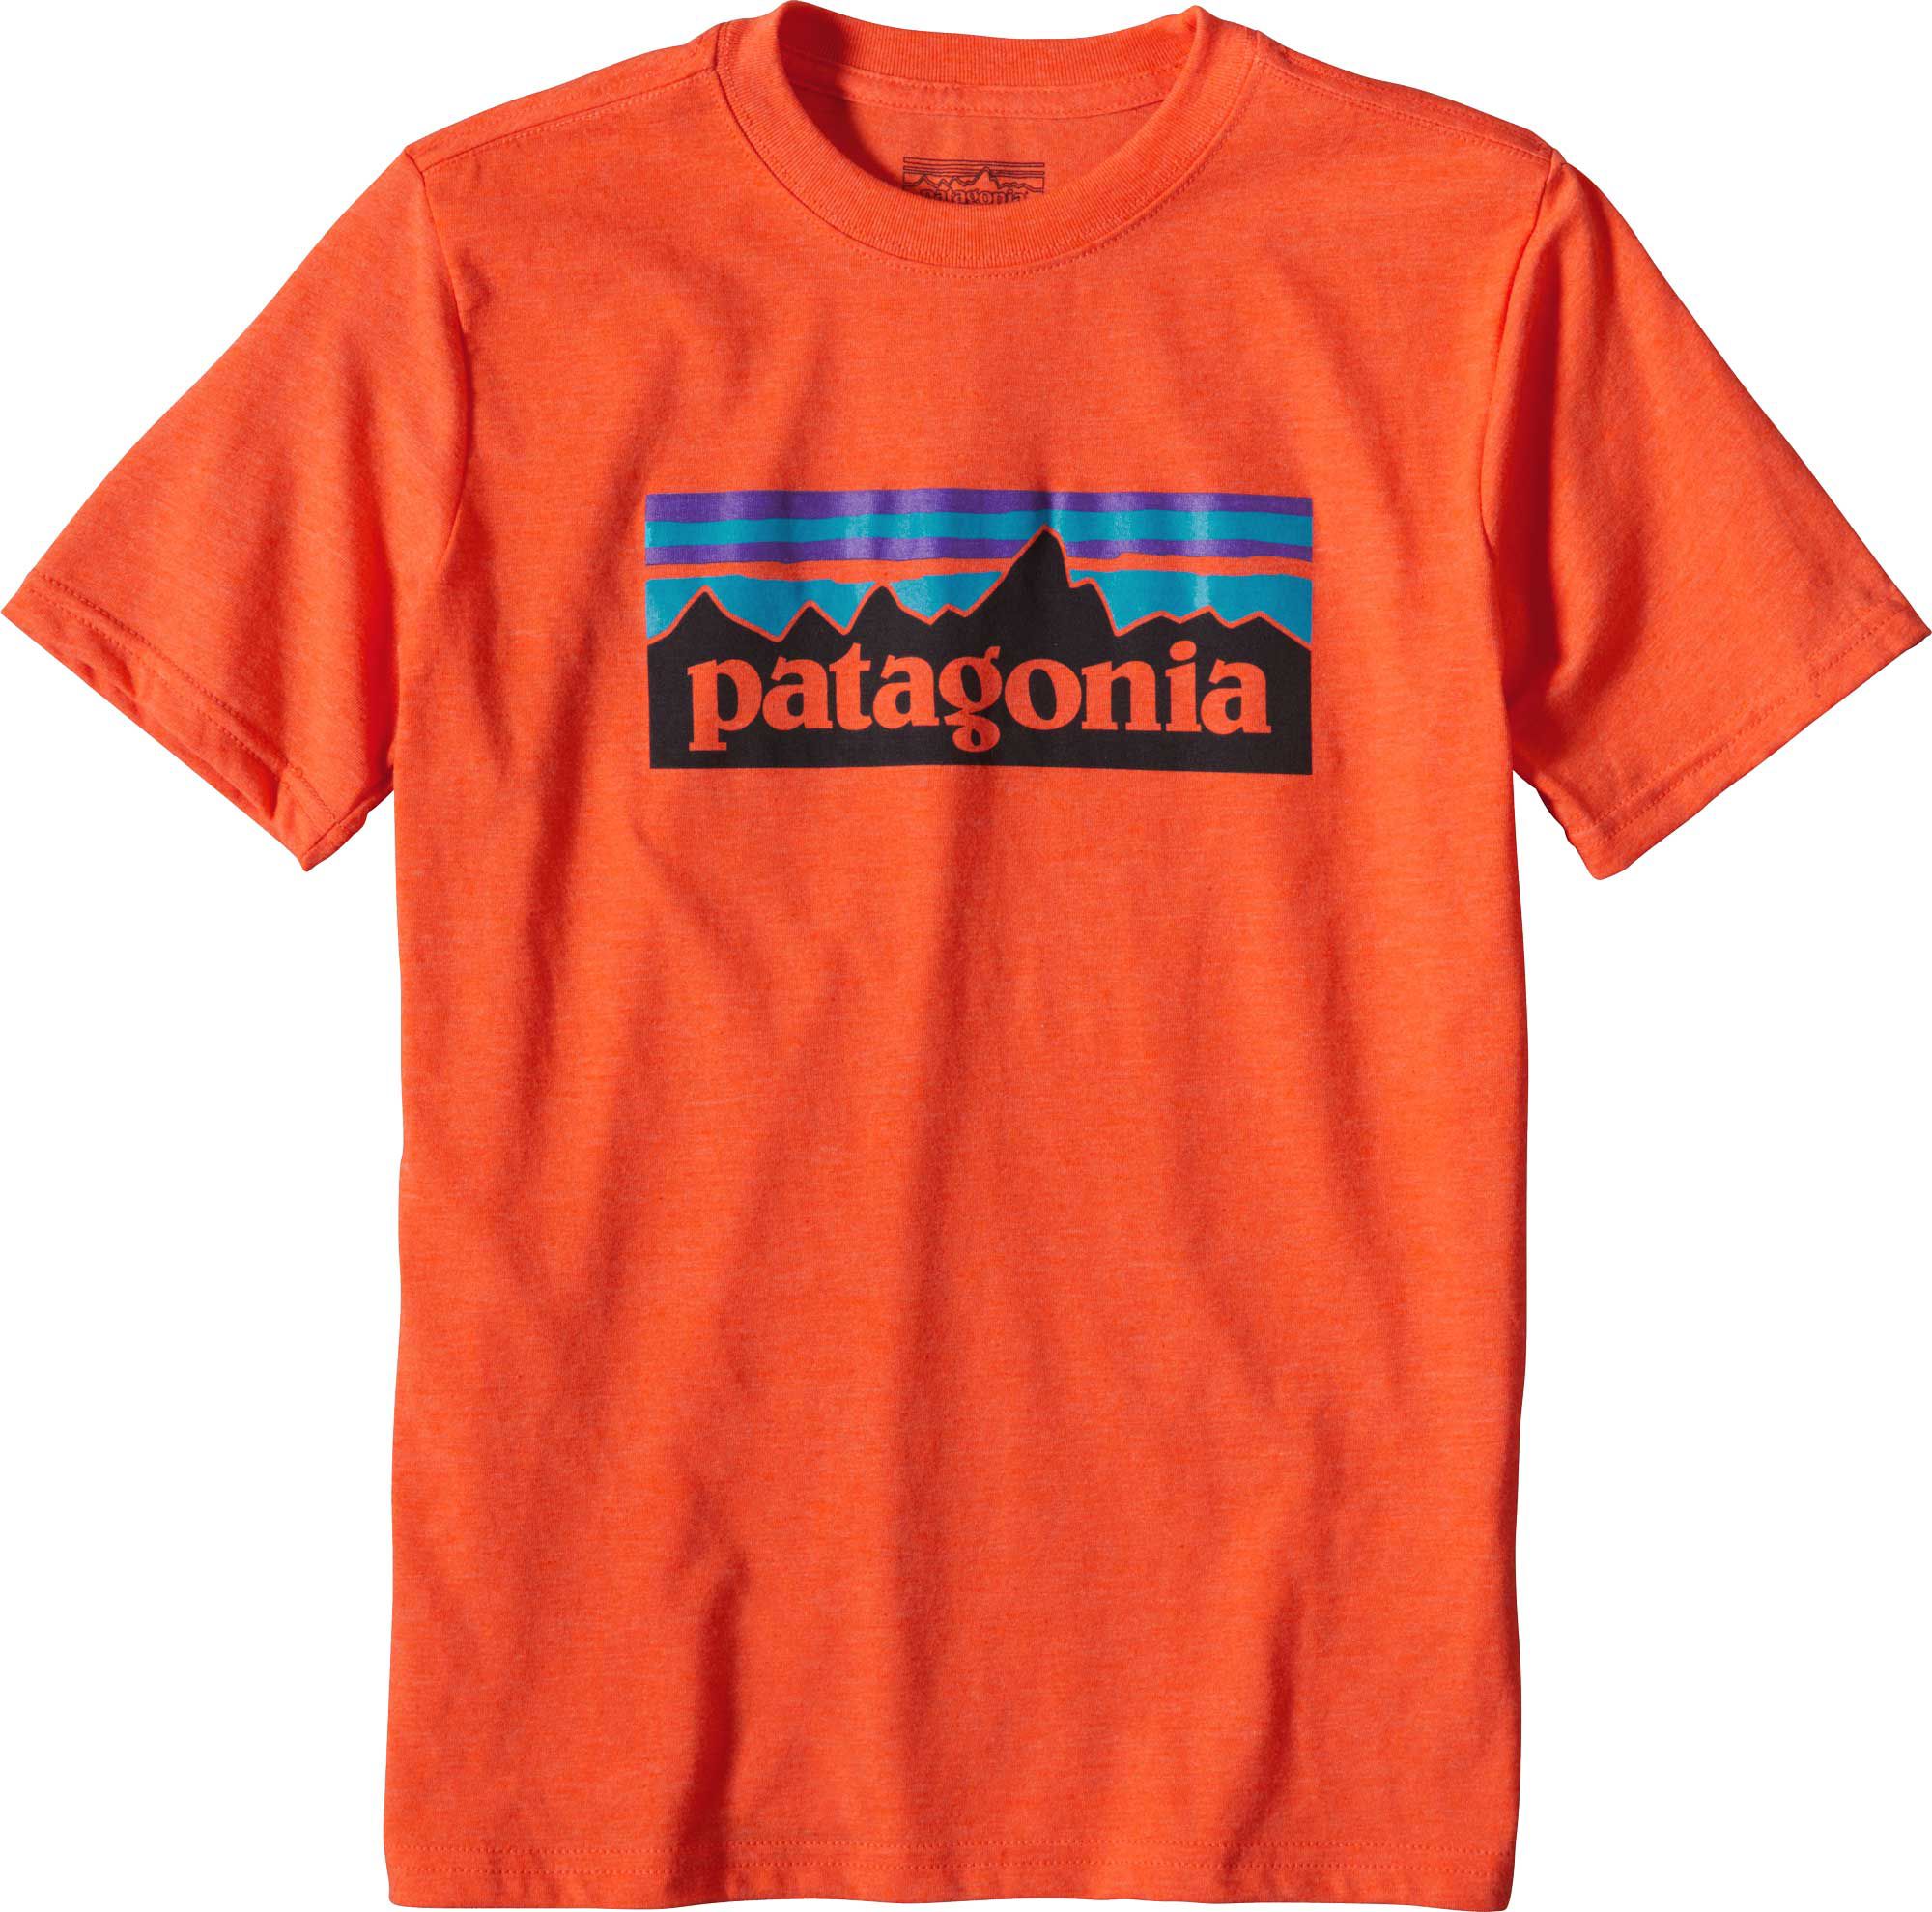 Patagonia Shirts & Tops | DICK'S Sporting Goods